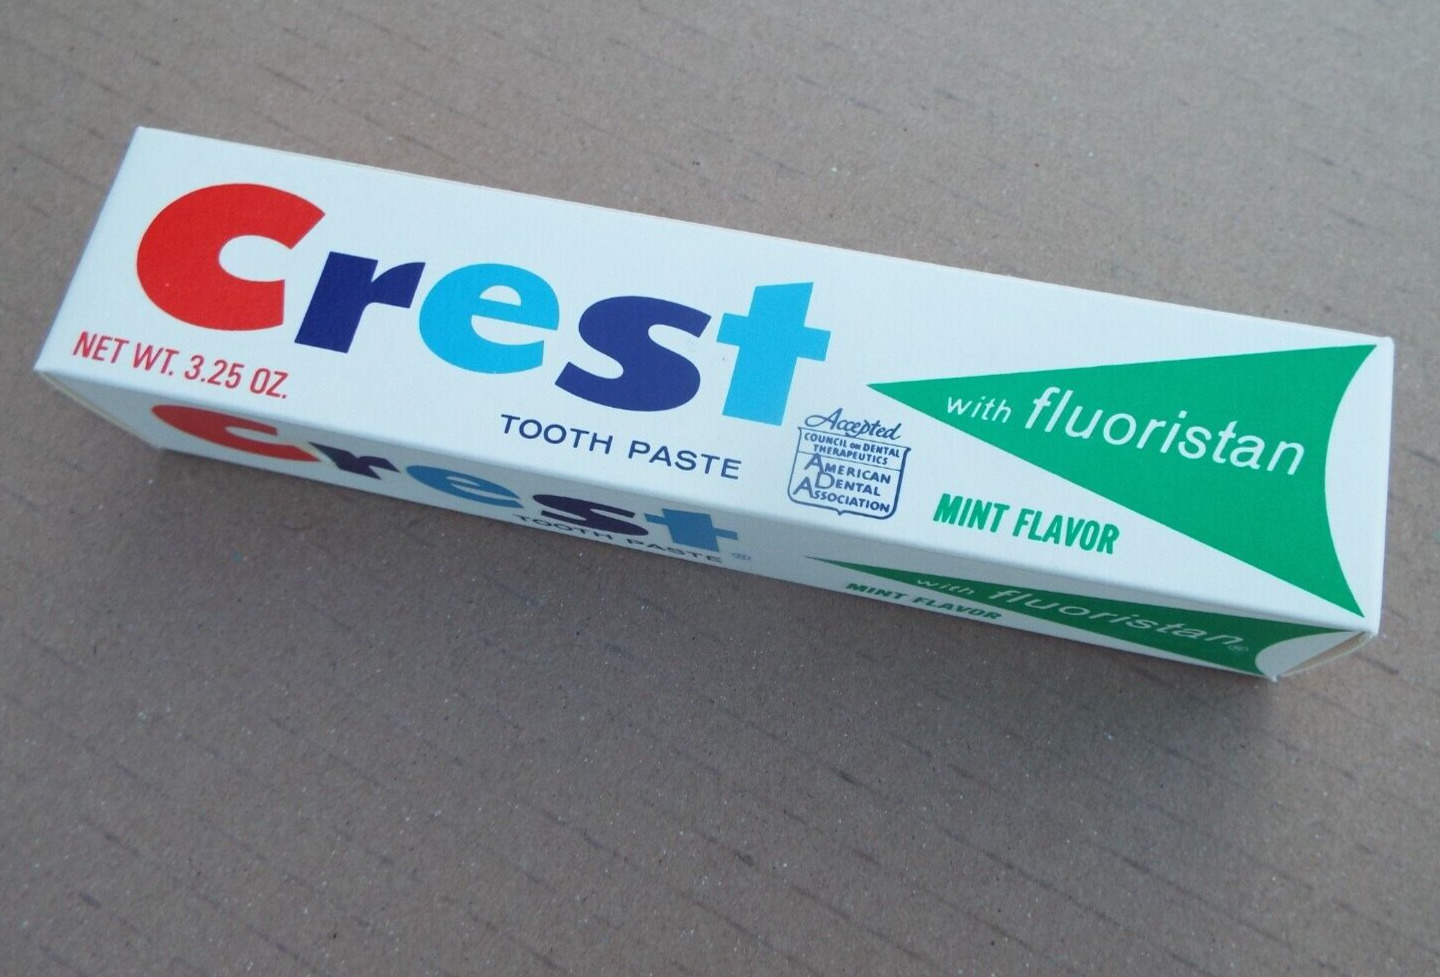 Vintage 80's Crest Toothpaste New in Box Collectible Crest USA.  L@@K